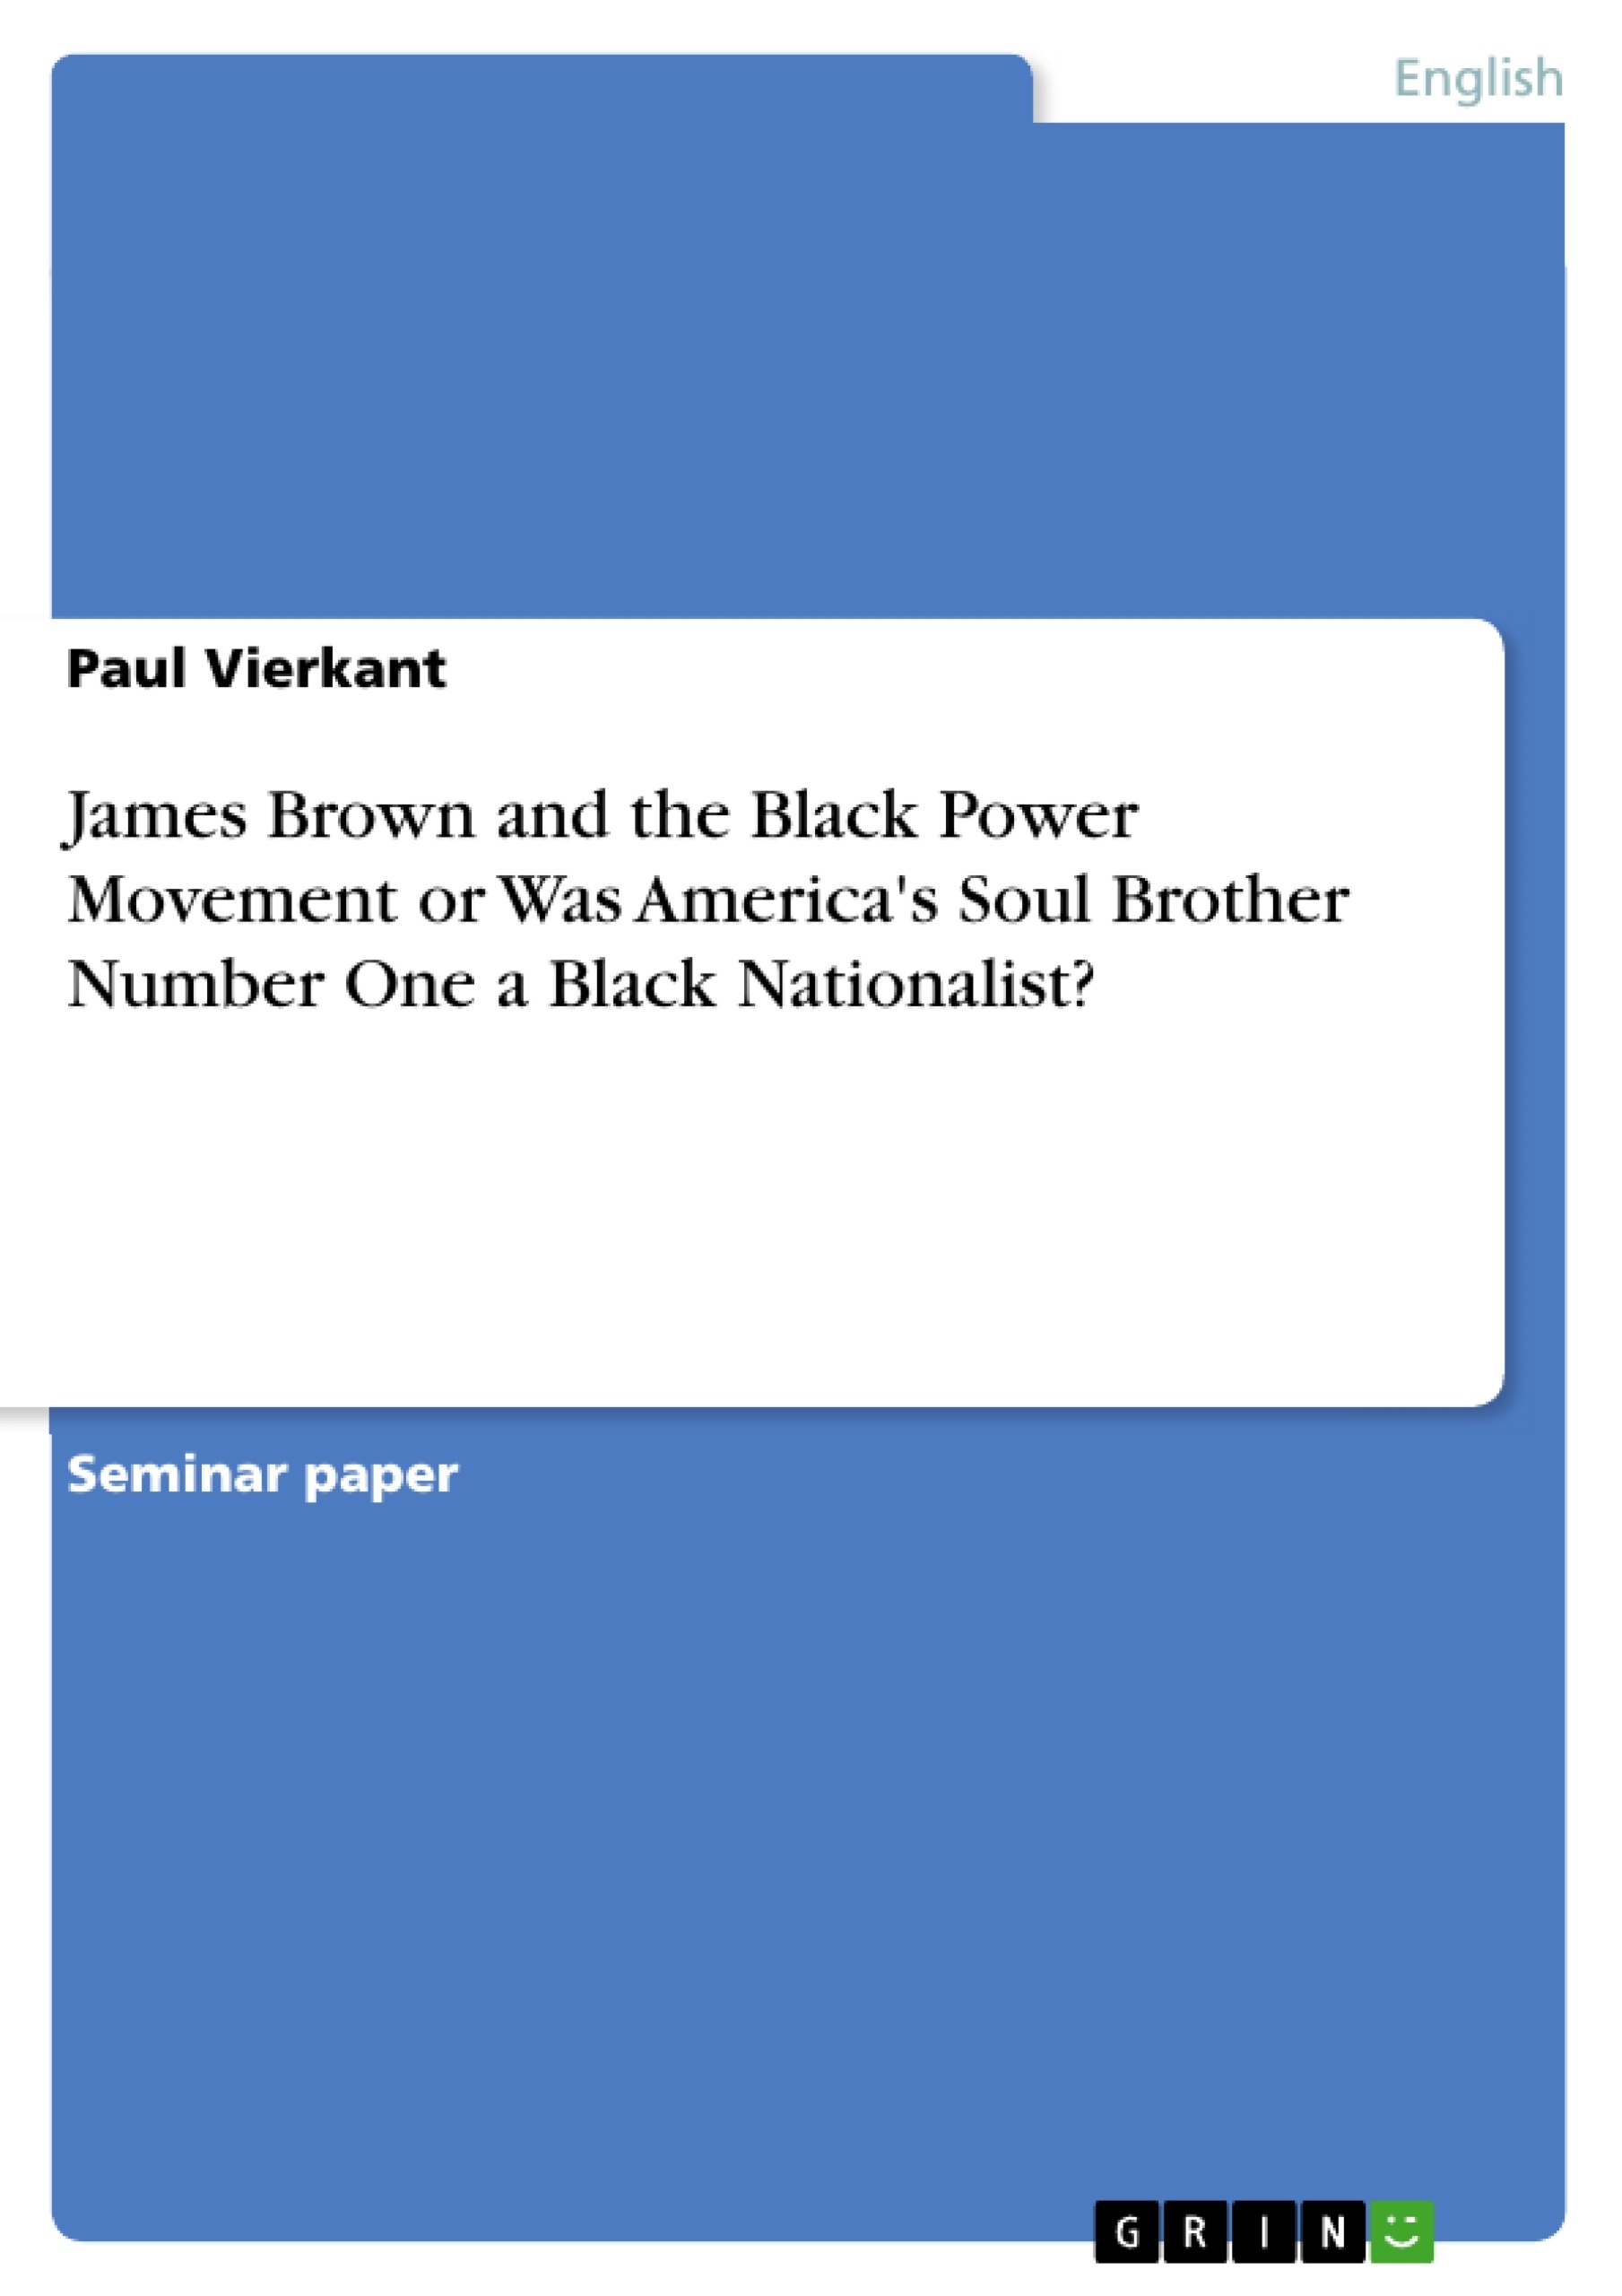 Title: James Brown and the Black Power Movement or Was America's Soul Brother Number One a Black Nationalist?